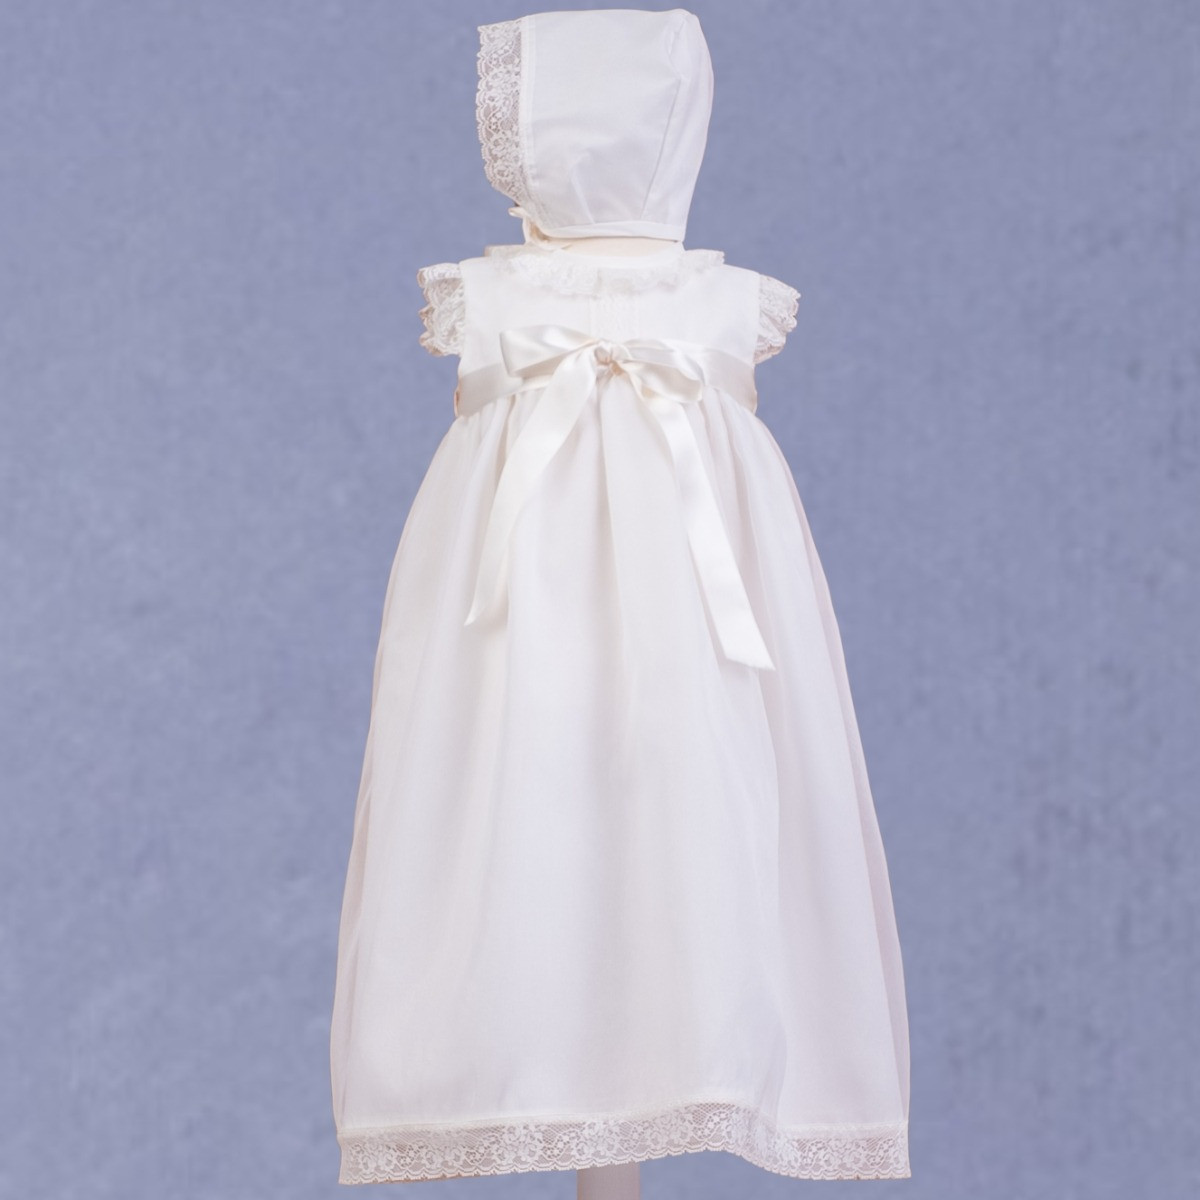 GIRLS CHRISTENING GOWN WITH CAP MISHA BABY - 3